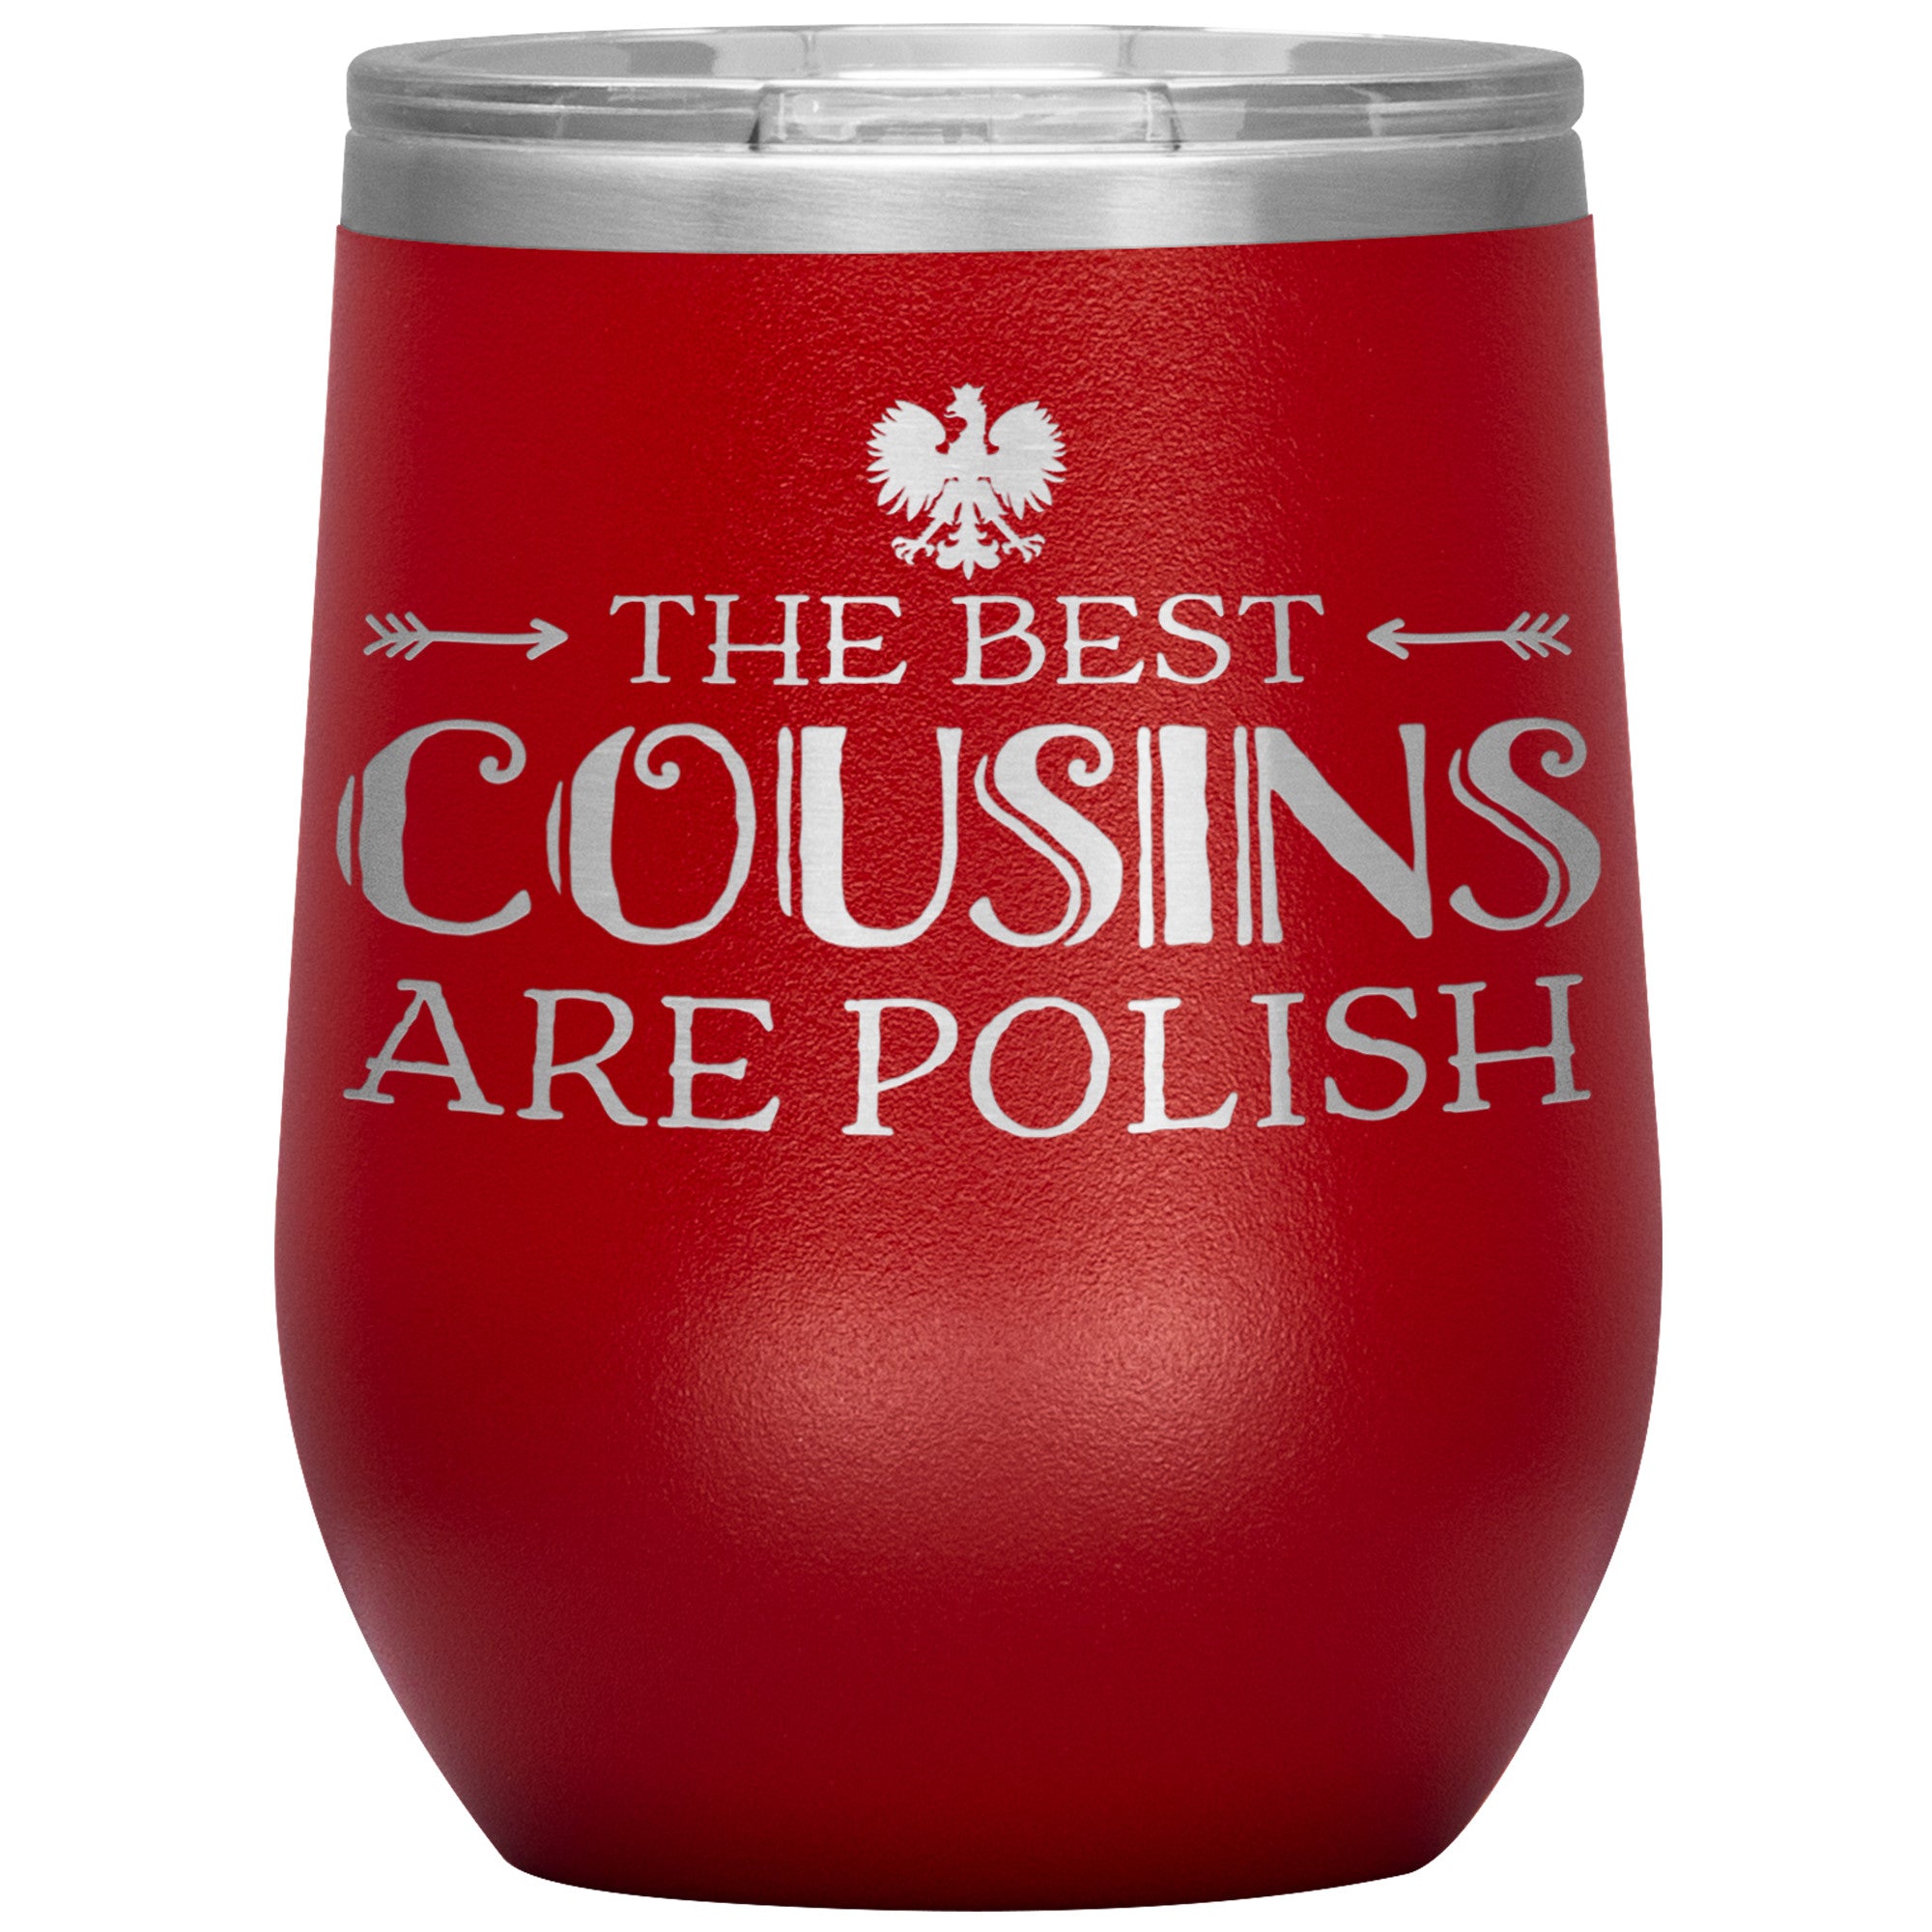 The Best Cousins Are Polish Insulated Wine Tumbler Tumblers teelaunch Red  